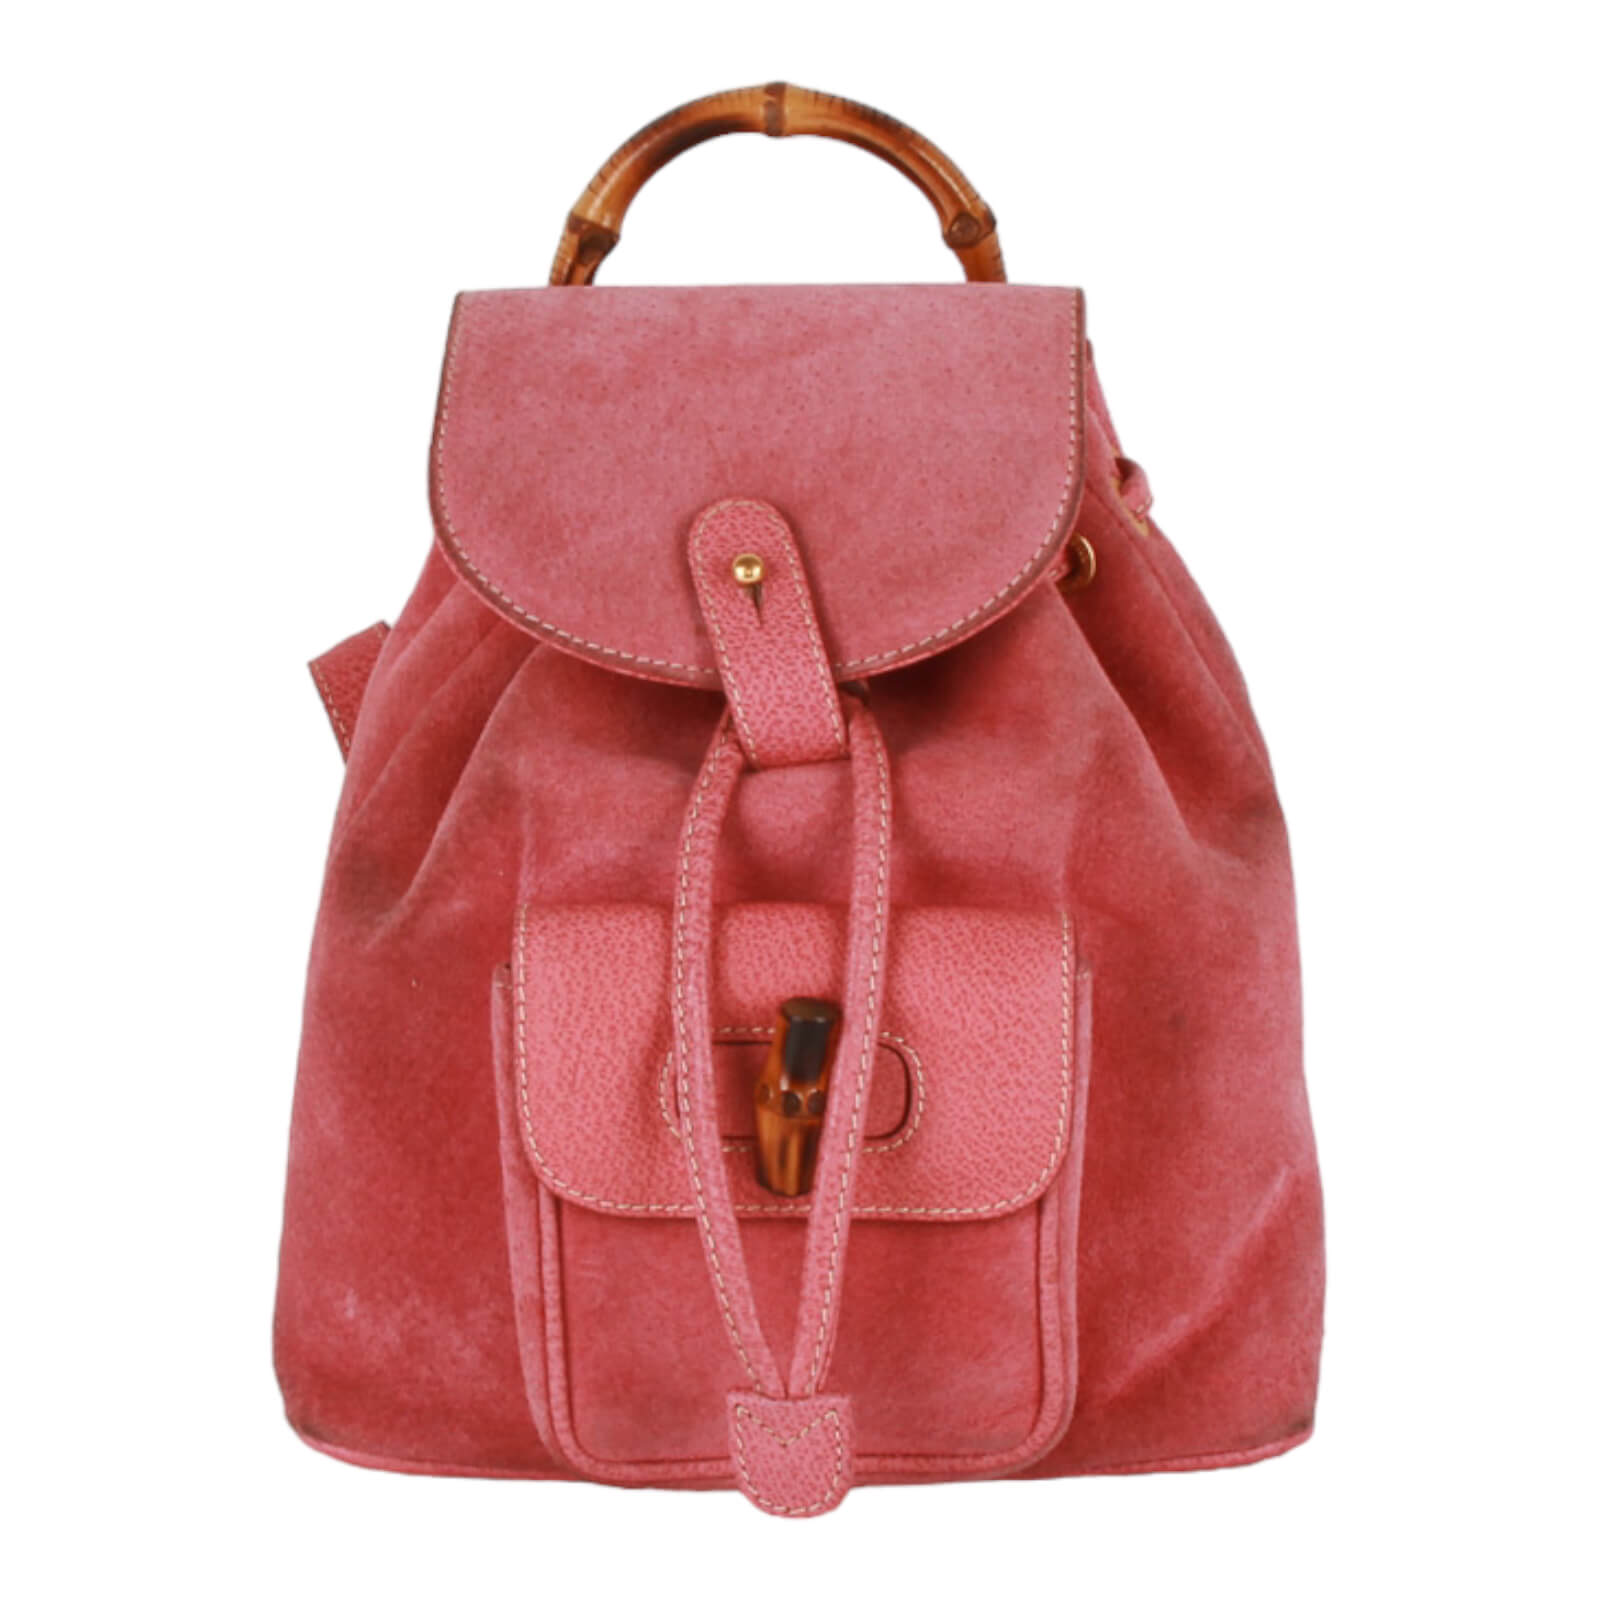 IMG-20210131-WA0021 | Gucci handbags outlet, Bags, Luxury backpack